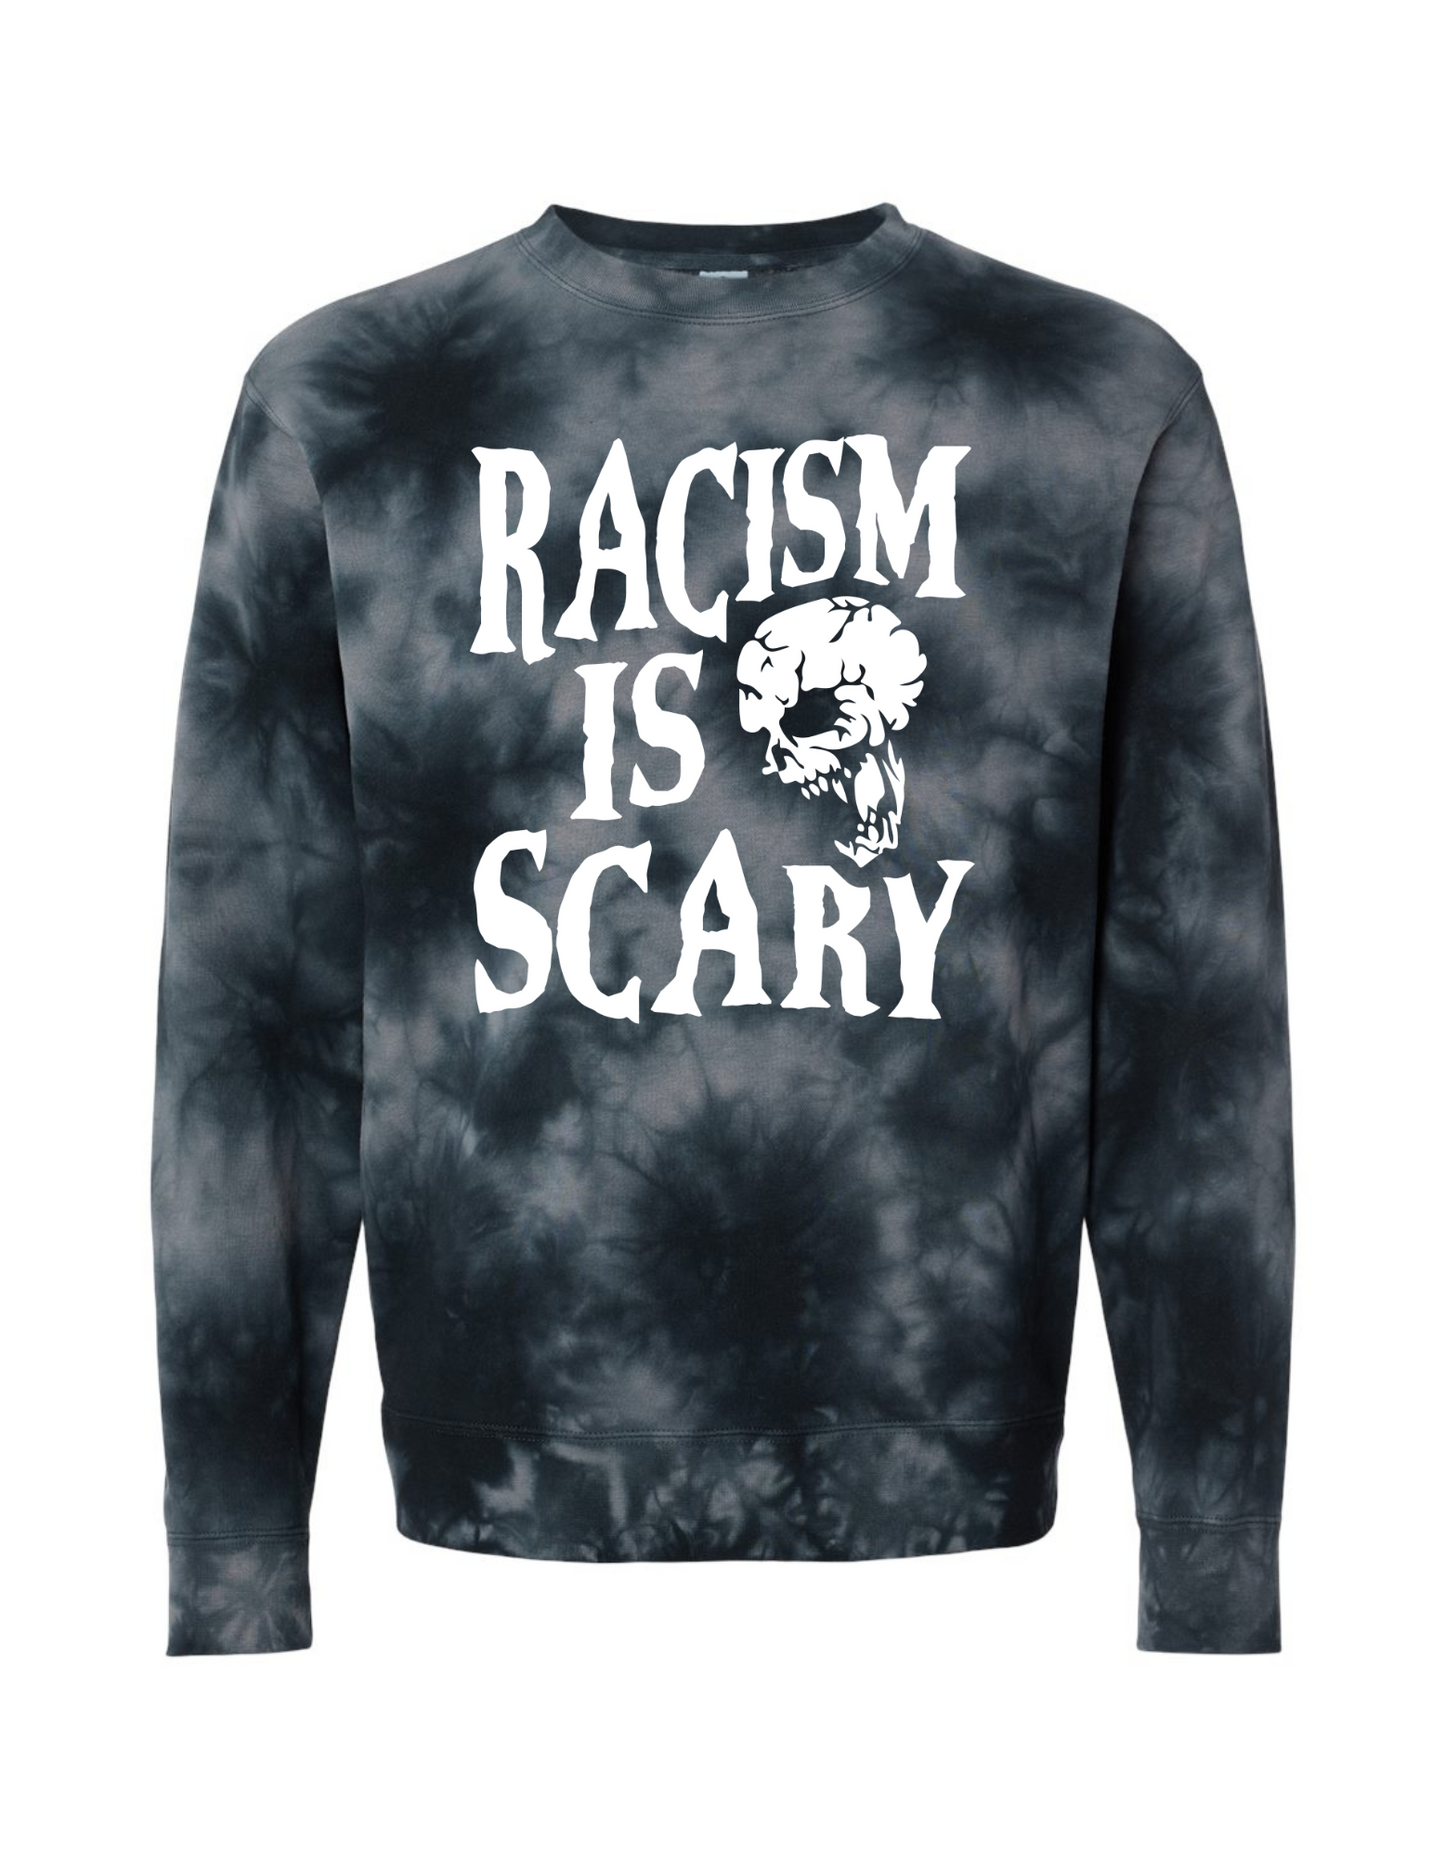 Racism Is Scary Crew